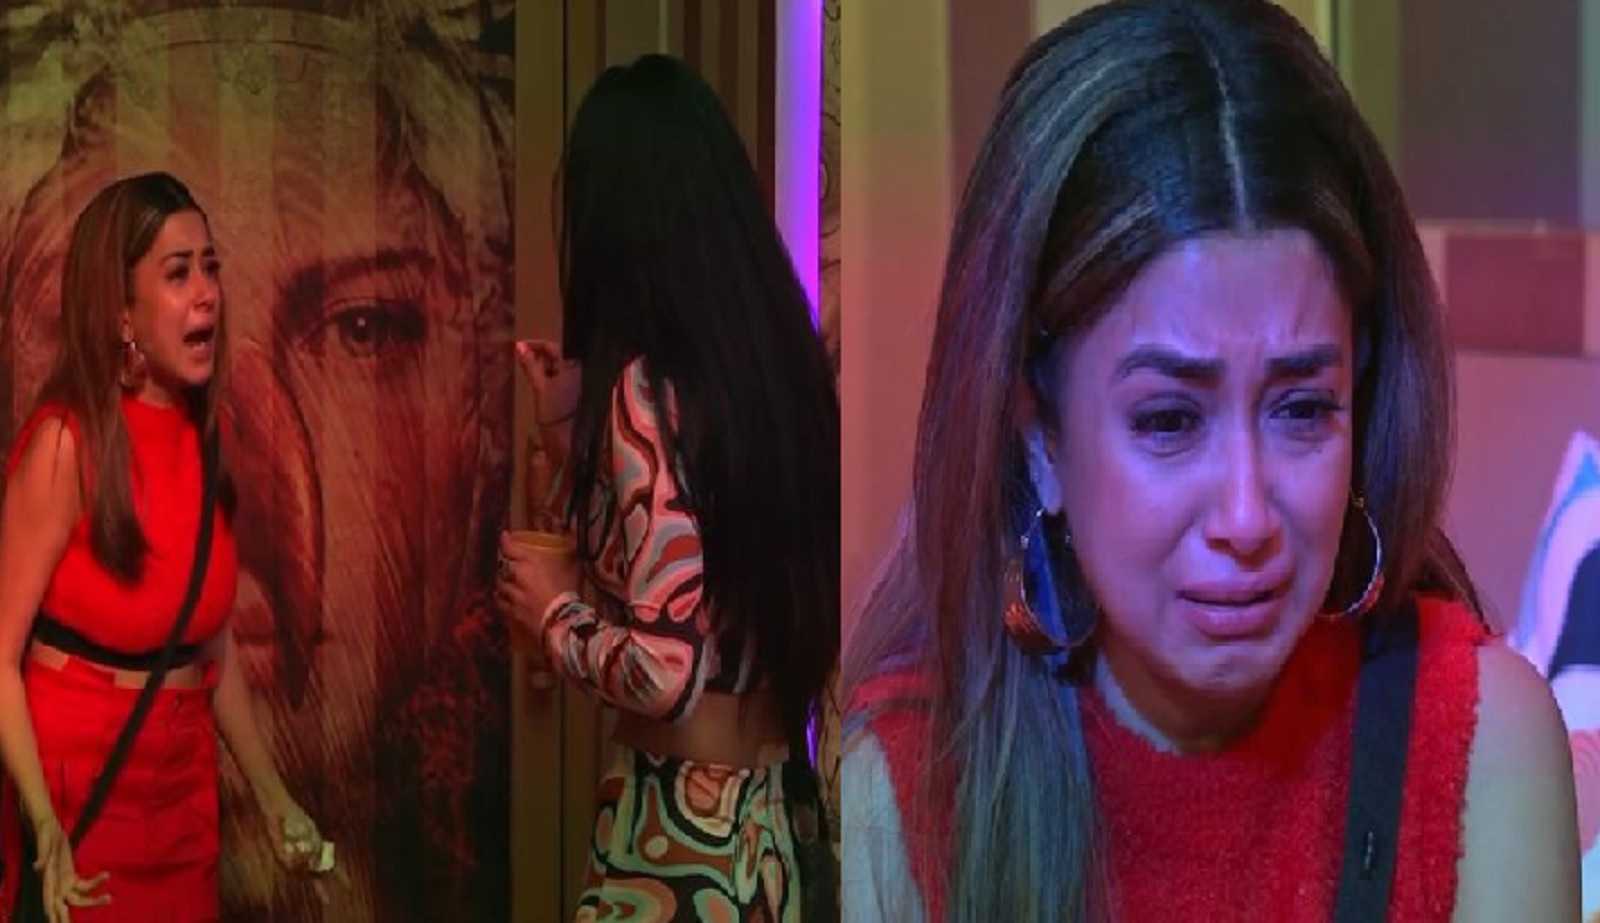 Bigg Boss 16: Tina Datta cries inconsolably after a tiff with Soundarya Sharma, wants to quit the show